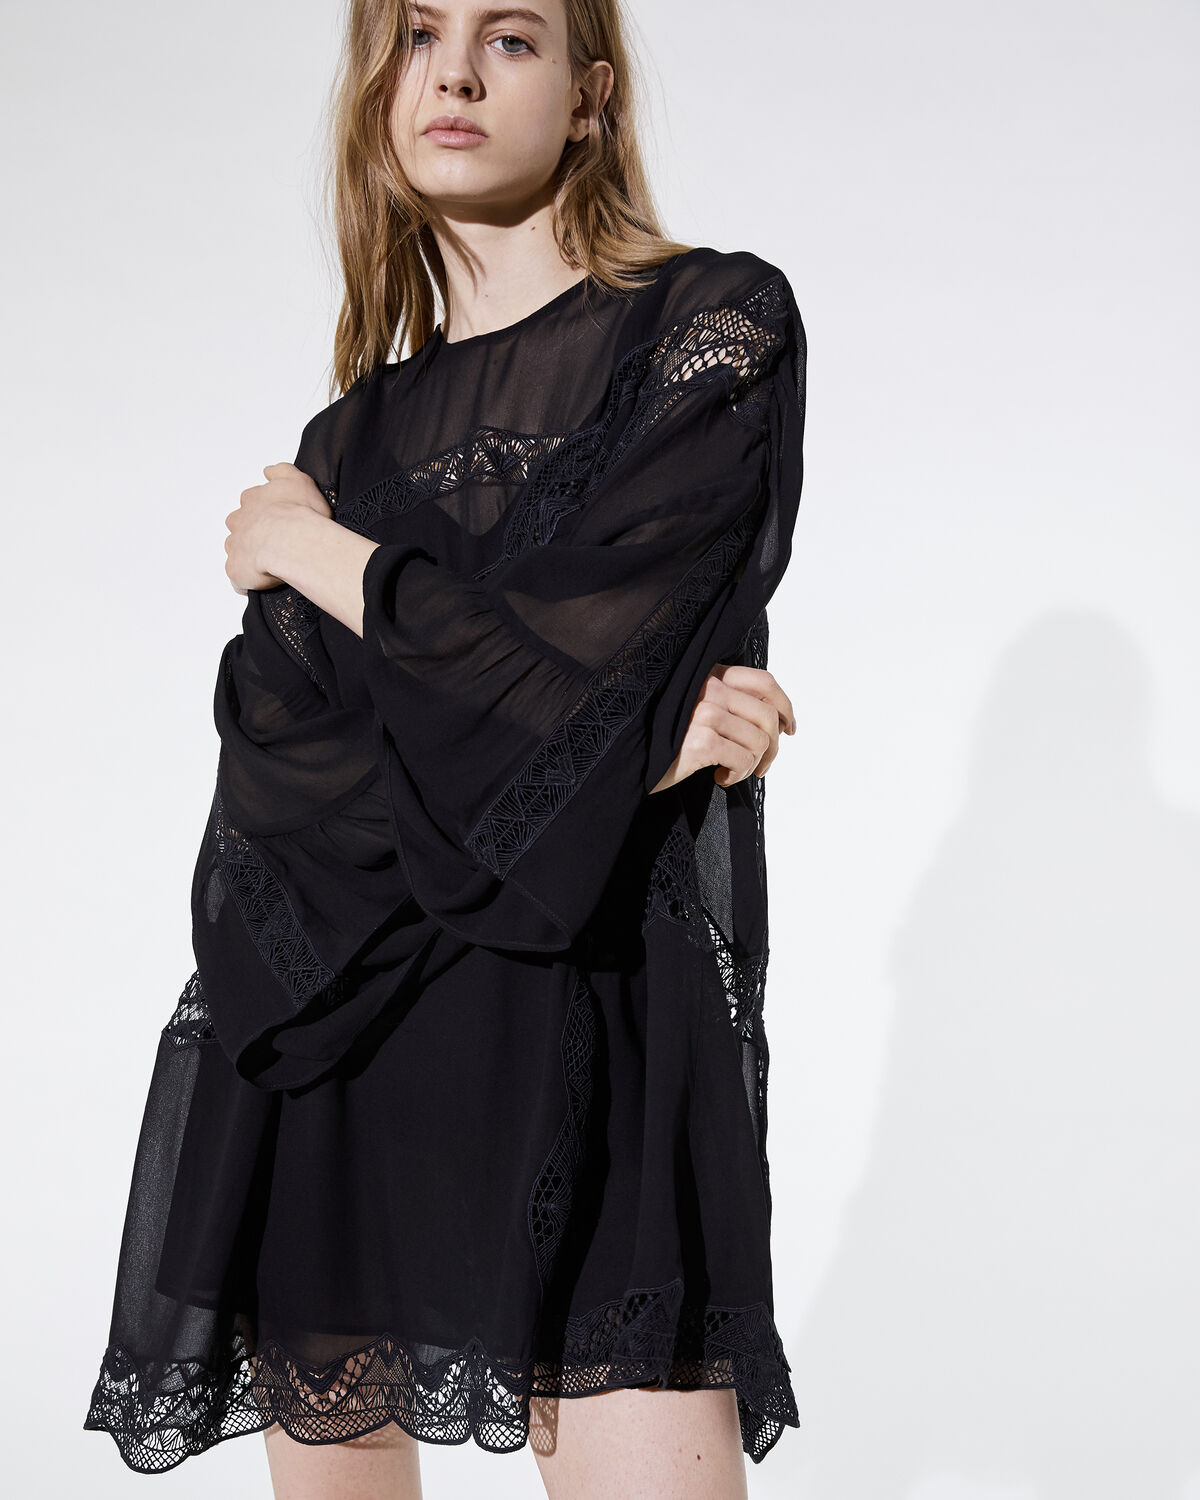 Photo of IRO Paris Farila Dress Black - Fluid And Airy, This Dress Will Bring The Bohemian Chic Touch To Your Outfits. It Is Sublimated By Its Transparency, Wide Sleeves And Lace Details. Dresses